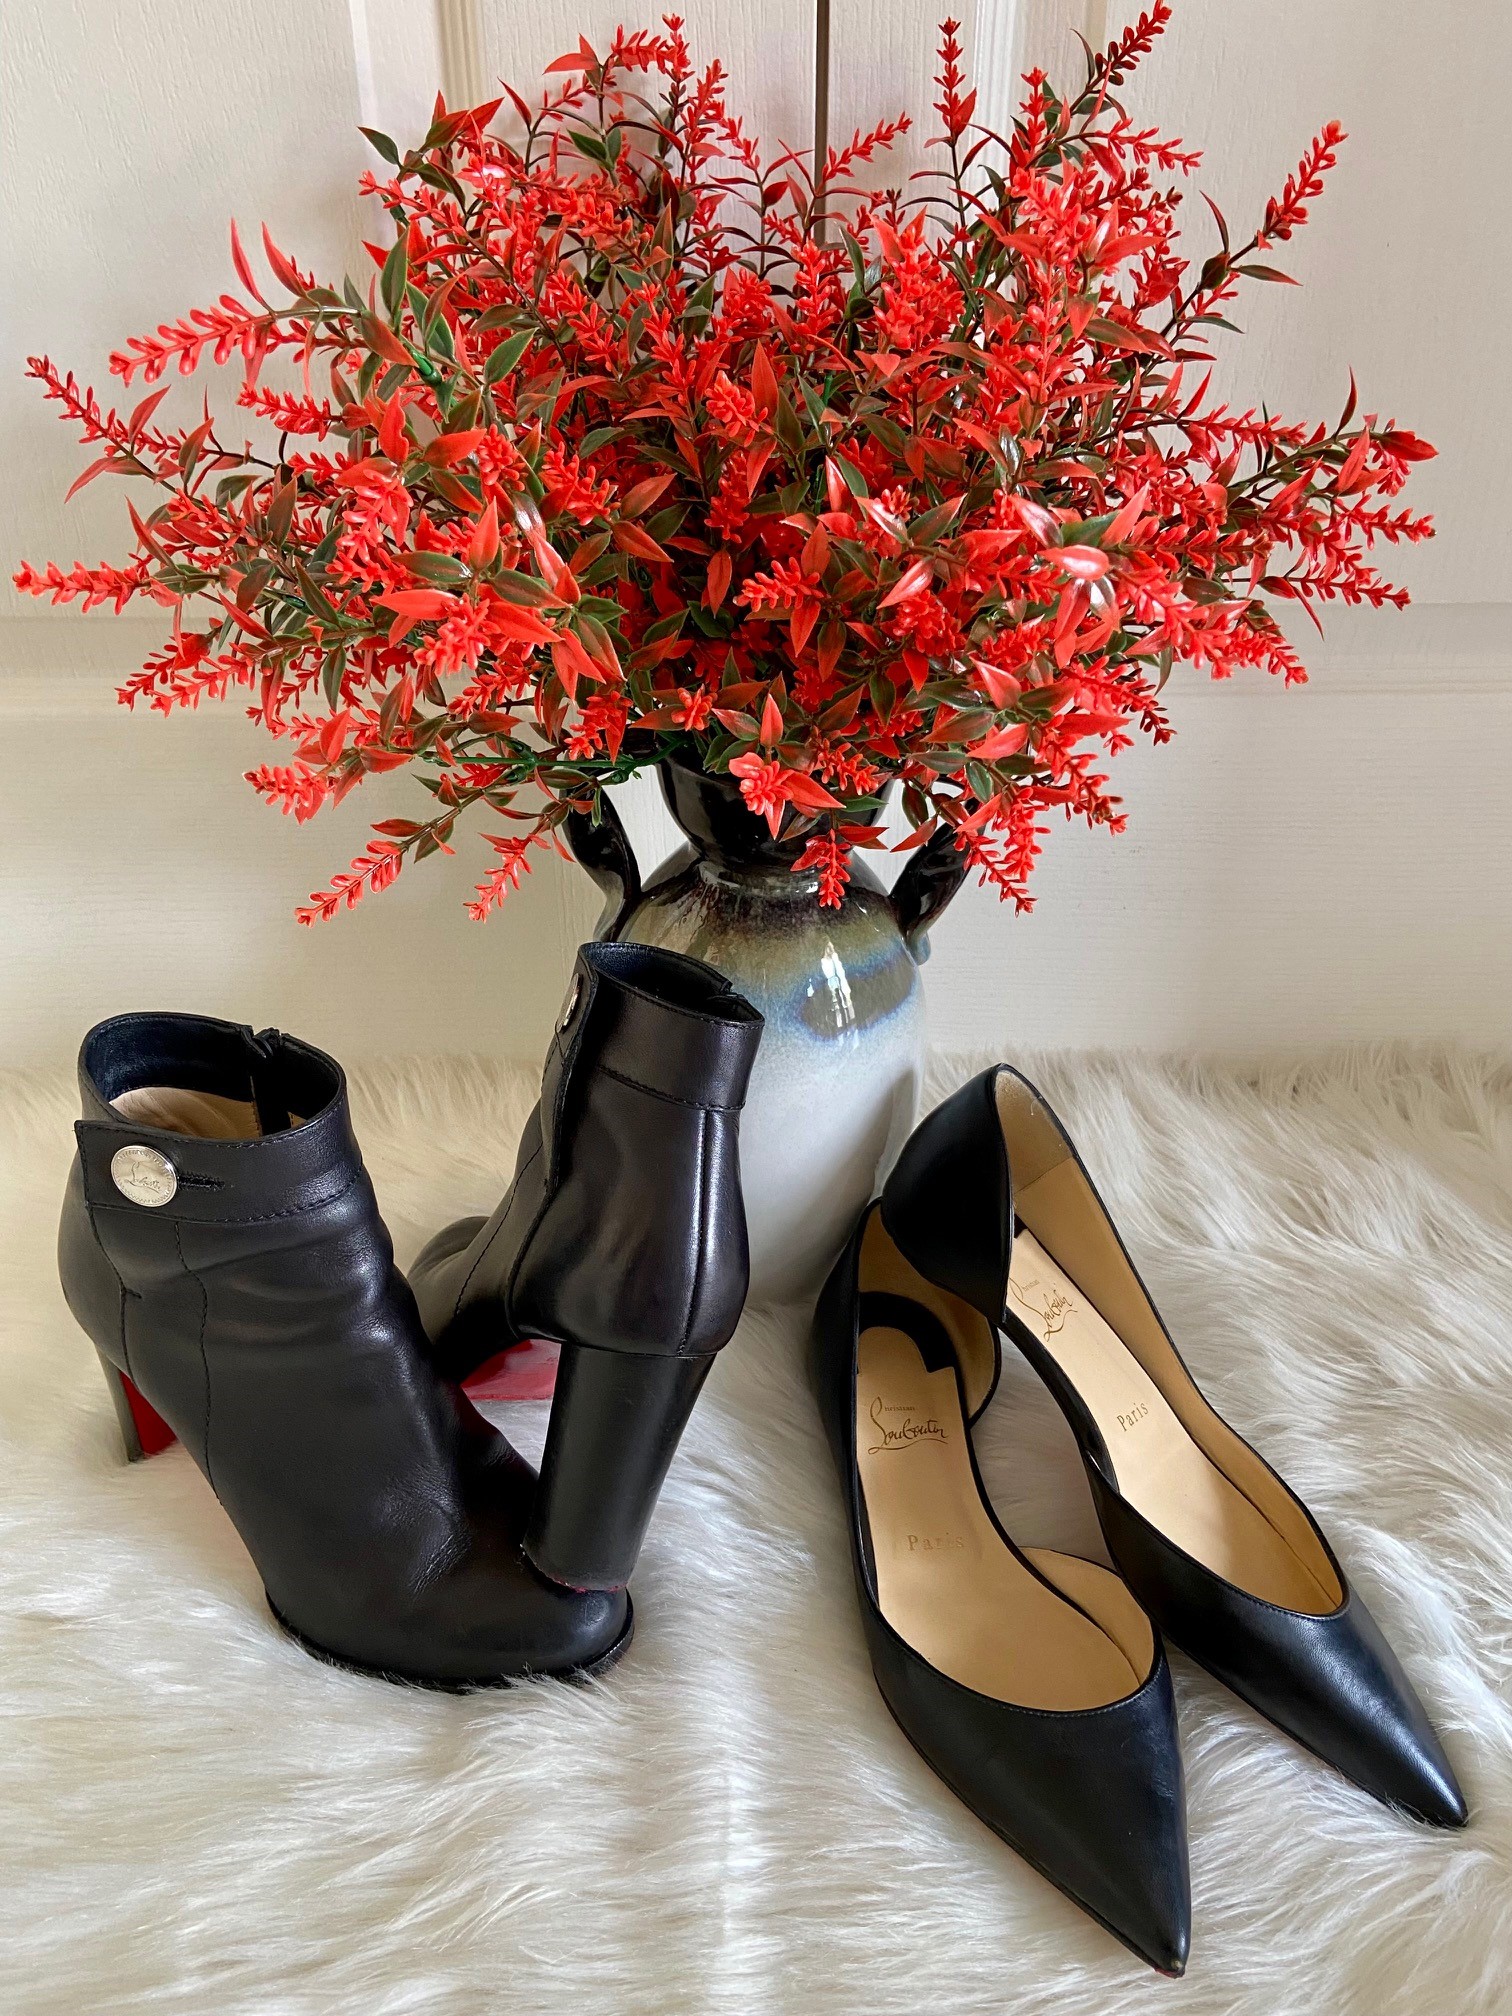 We Tried Louboutin Red Bottoms For You – Here's Our Honest Review!